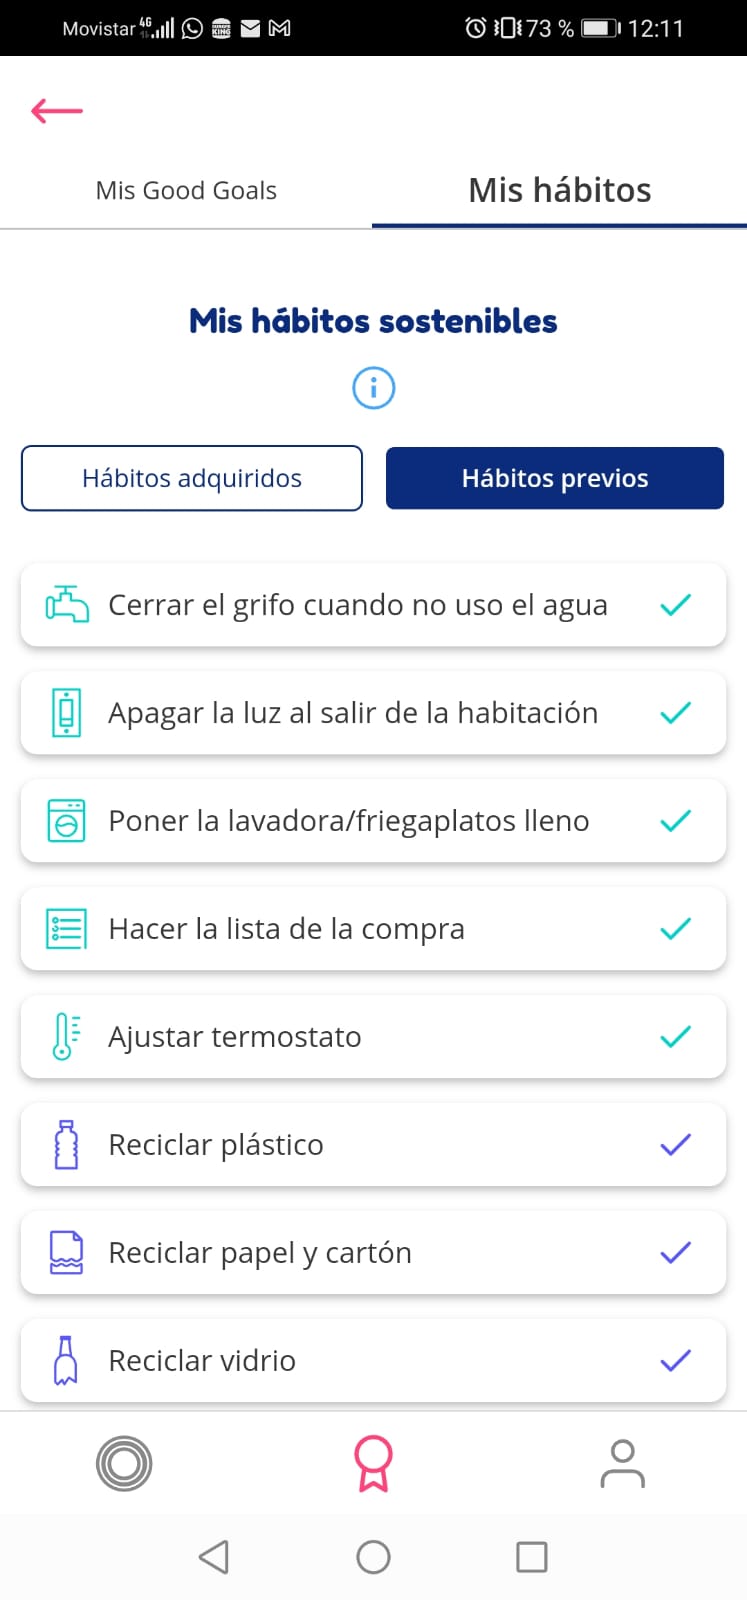 The image shows those habits that we had before using the application, which are indicated in the completed questionnaire.